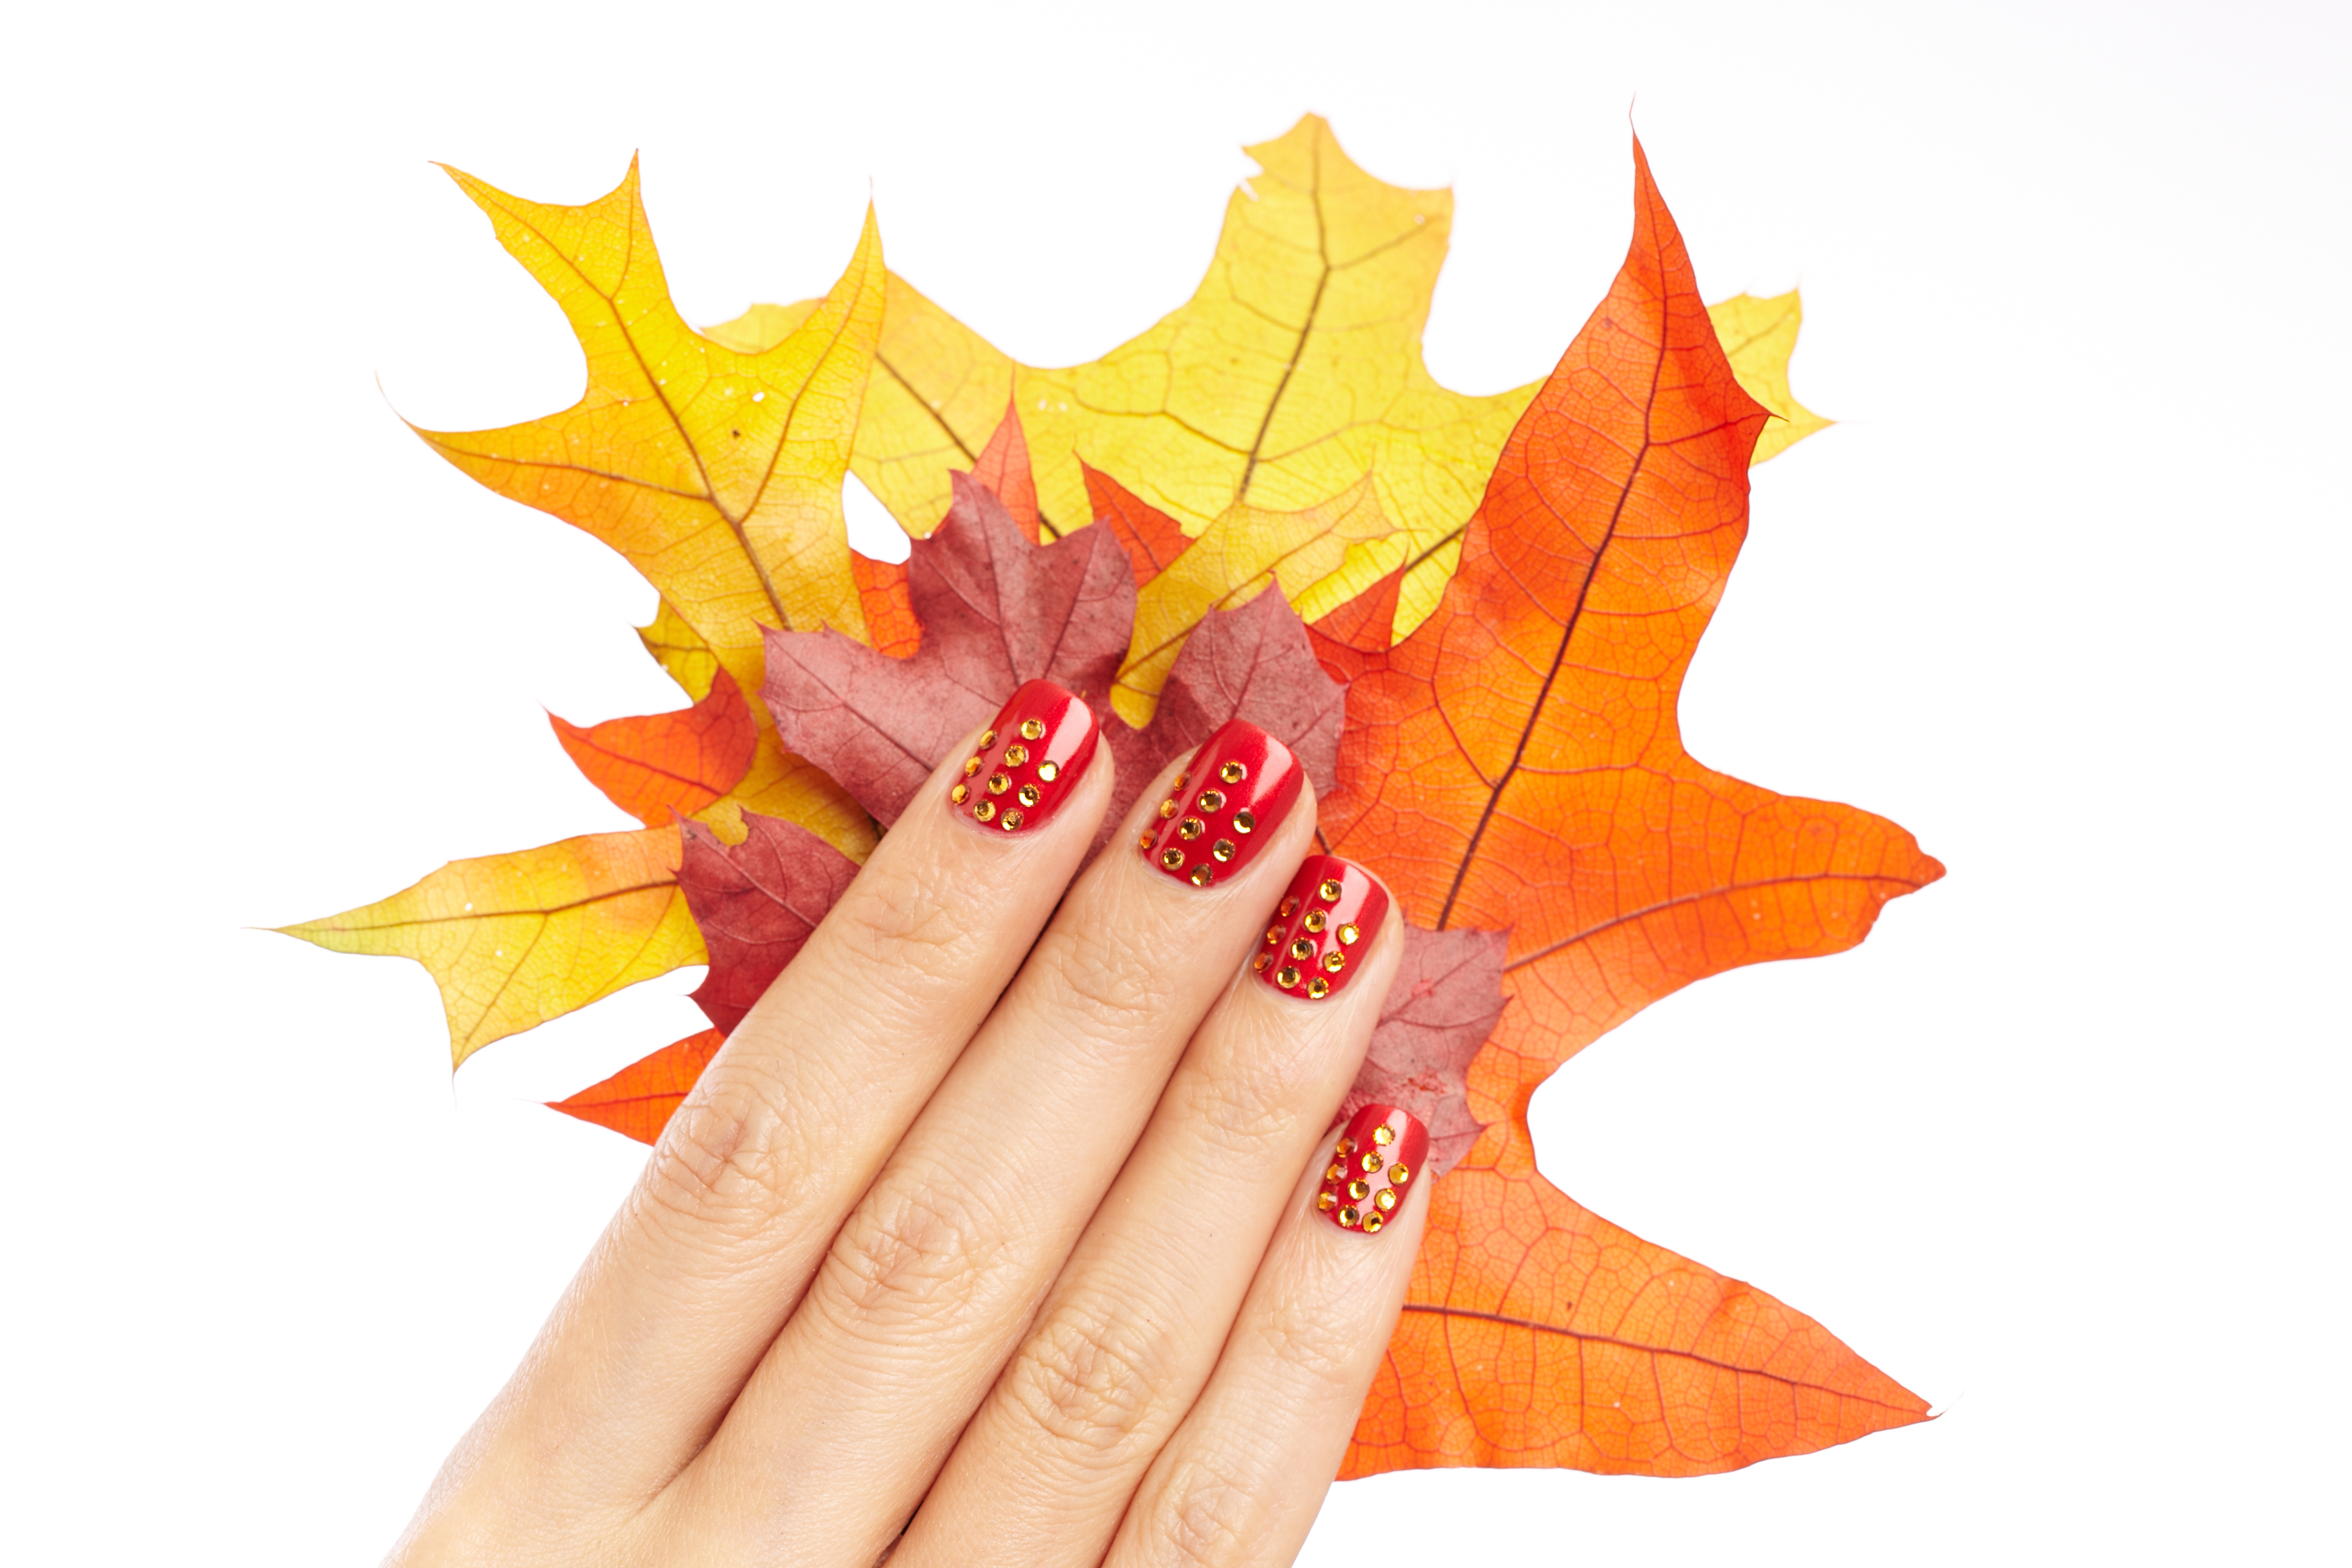 Hands holding leaves with nails painted red with orange rhinestones